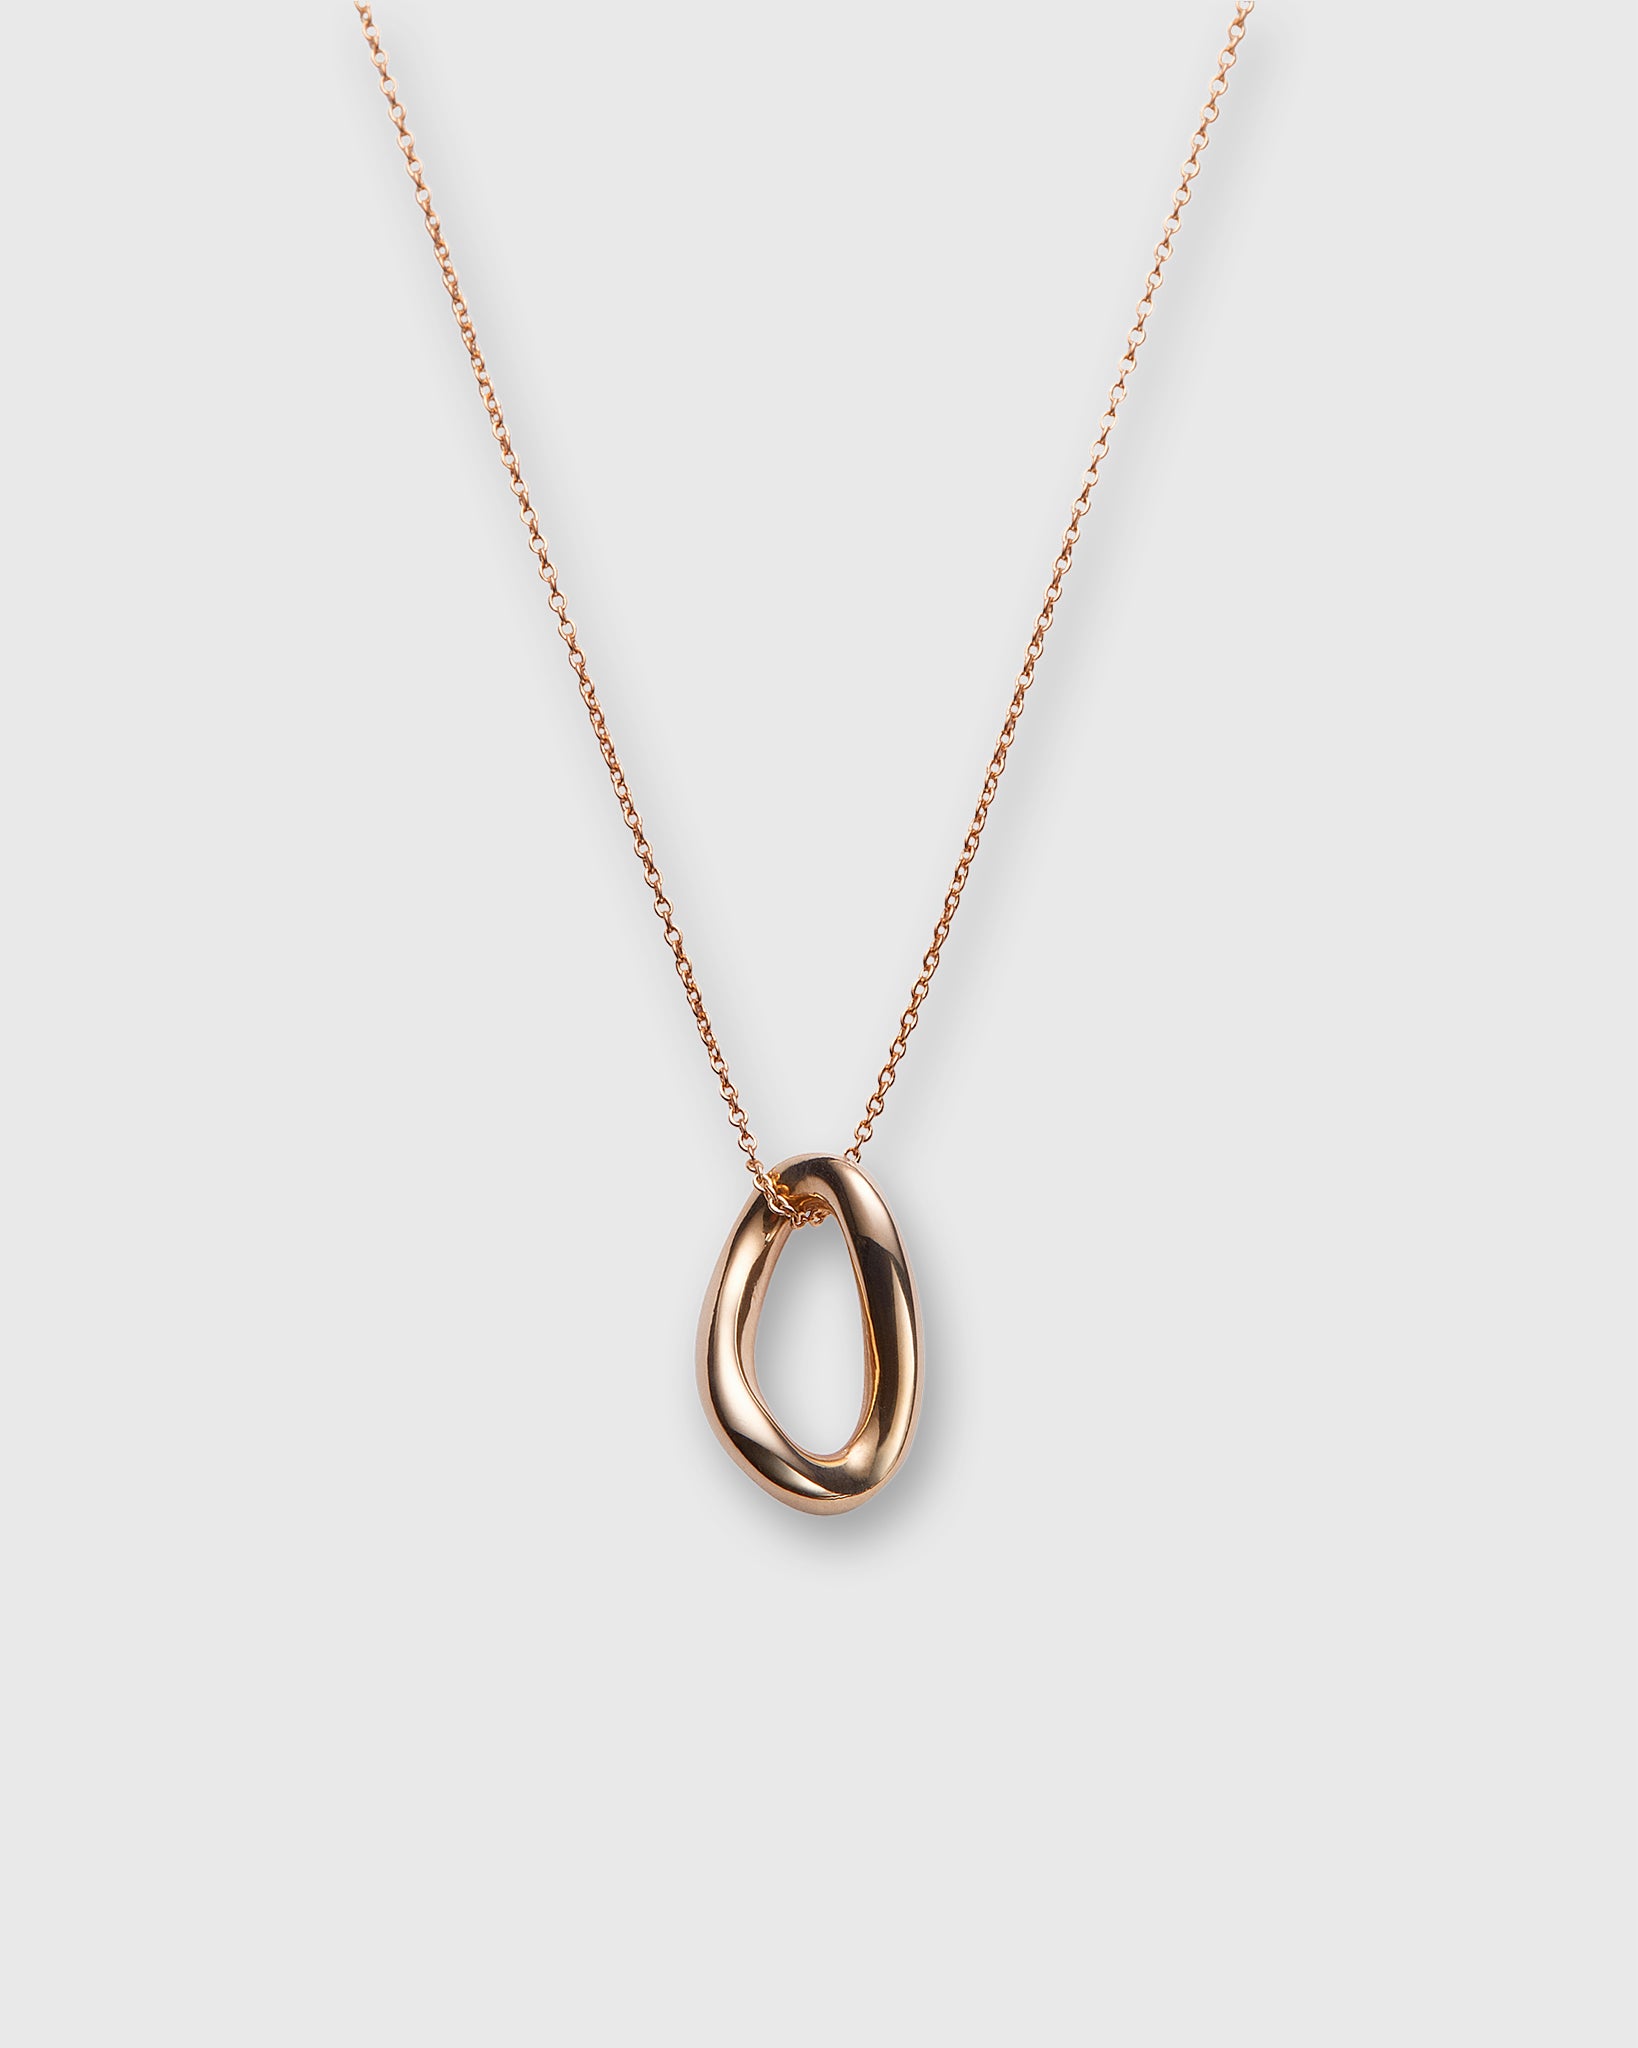 Long Link Pendant Necklace in Gold-Plated Brass